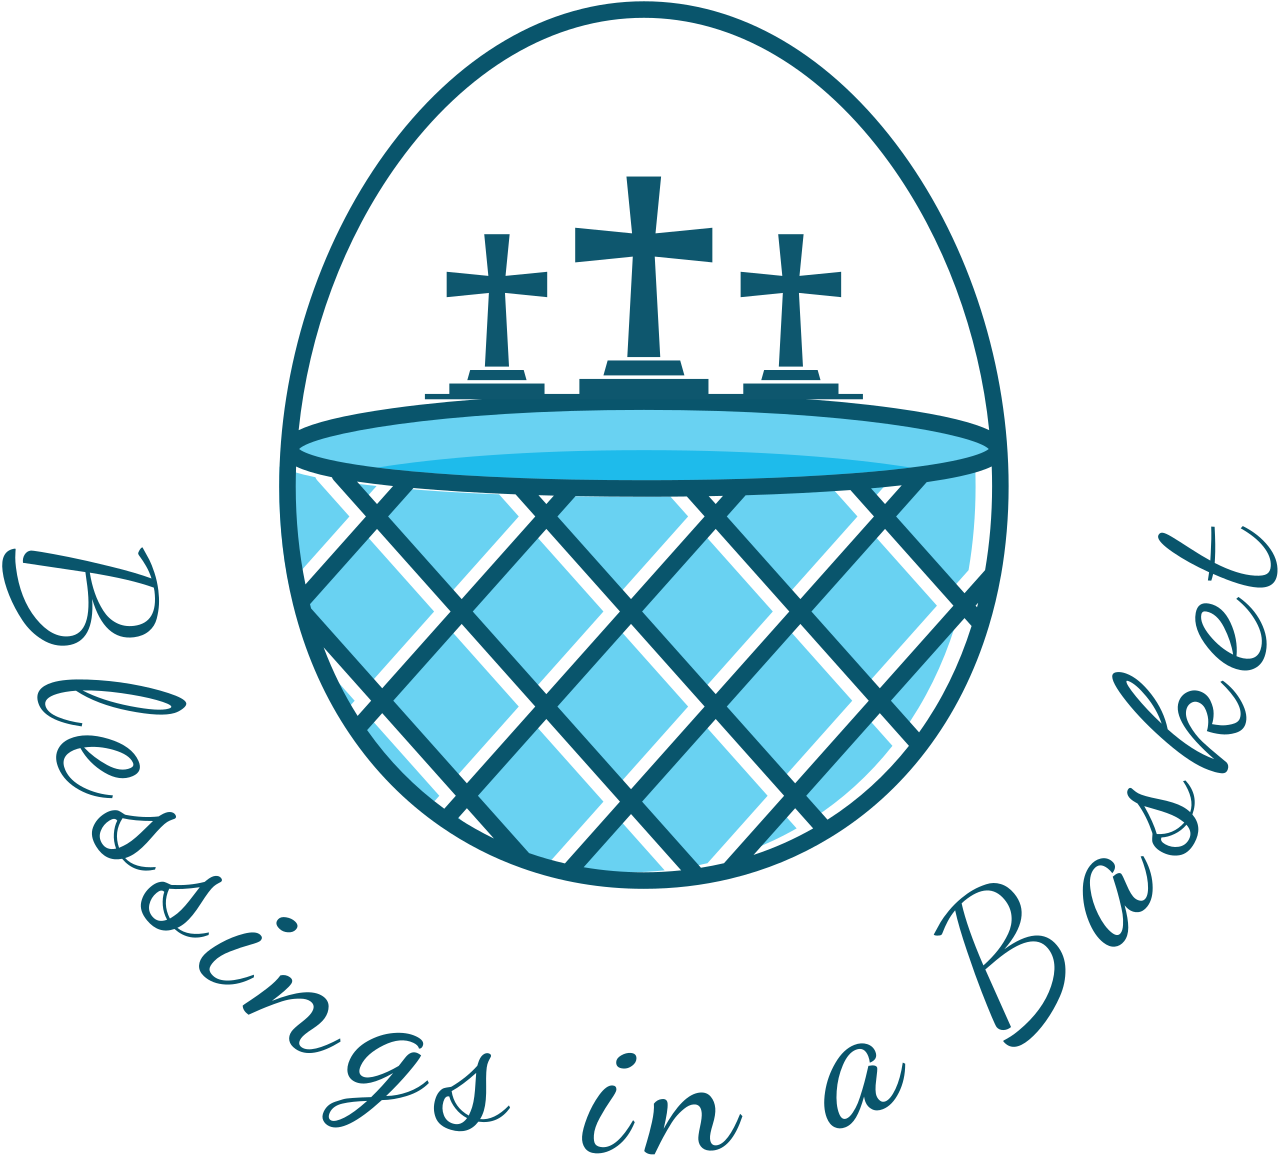 Blessings in a Basket's logo